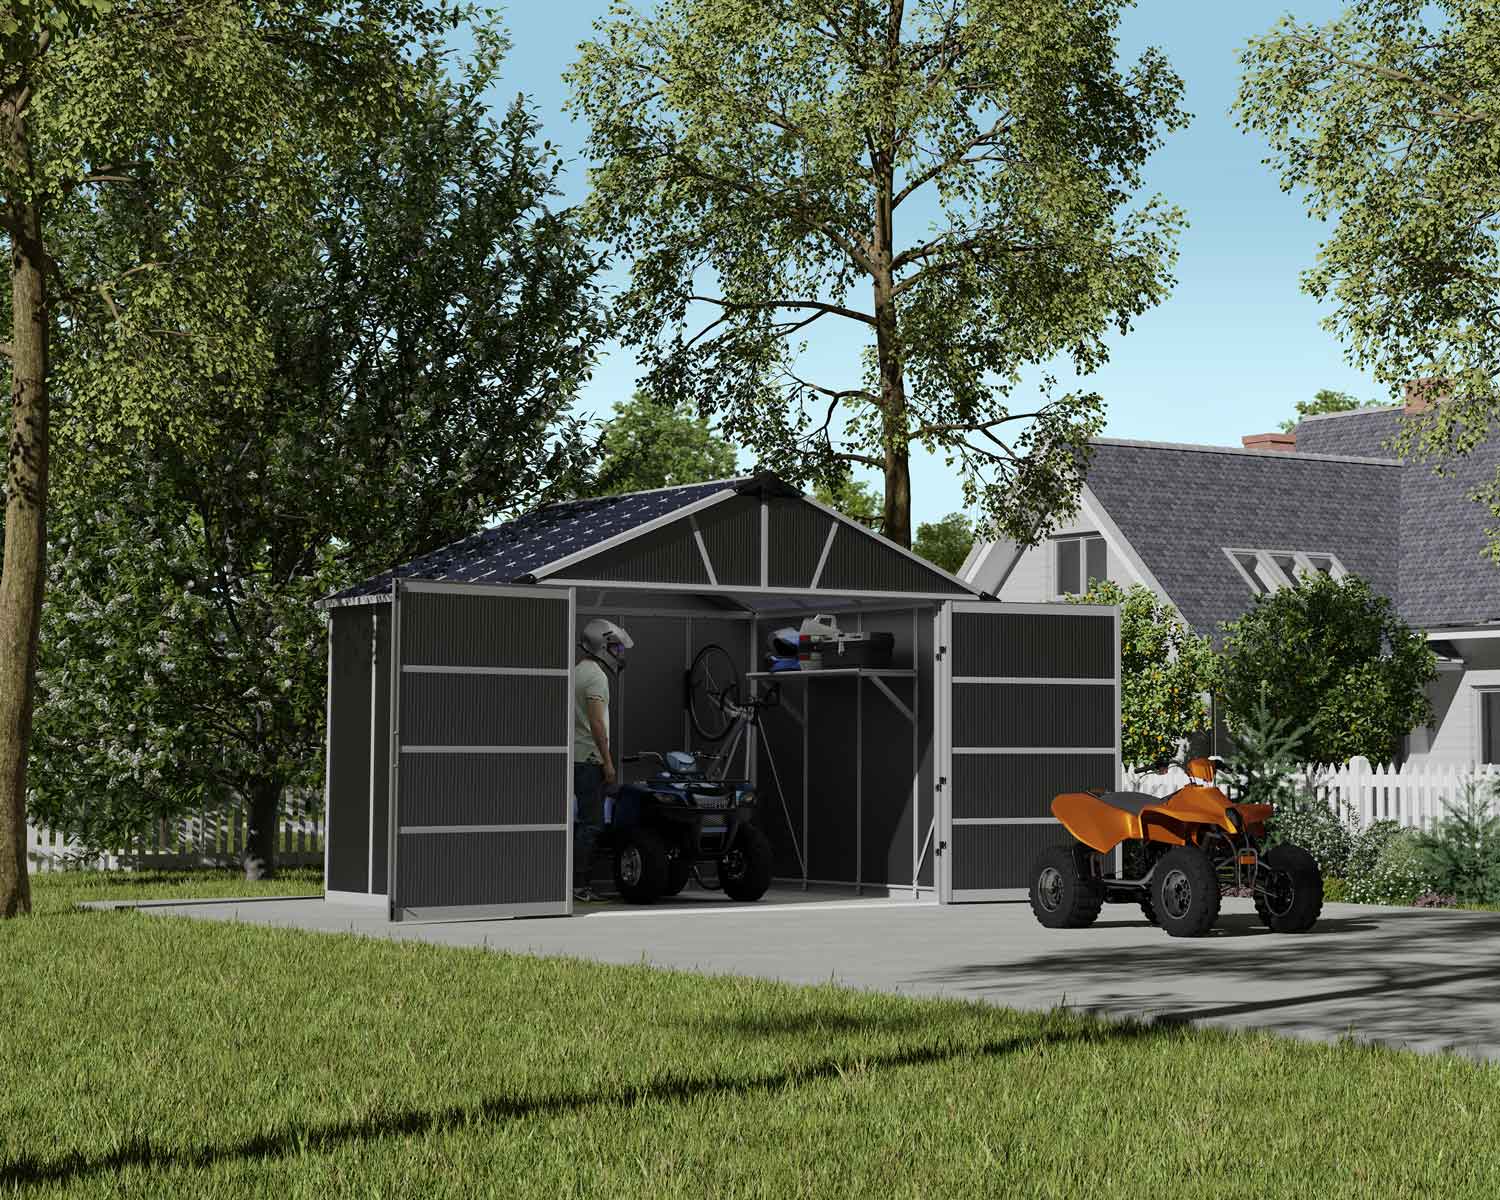 Yukon 11&#039; x 9&#039; Dark Grey Polycarbonate Multiwall and Aluminum Frame. ATV parked in a Plastic Garage Shed with Double Door.